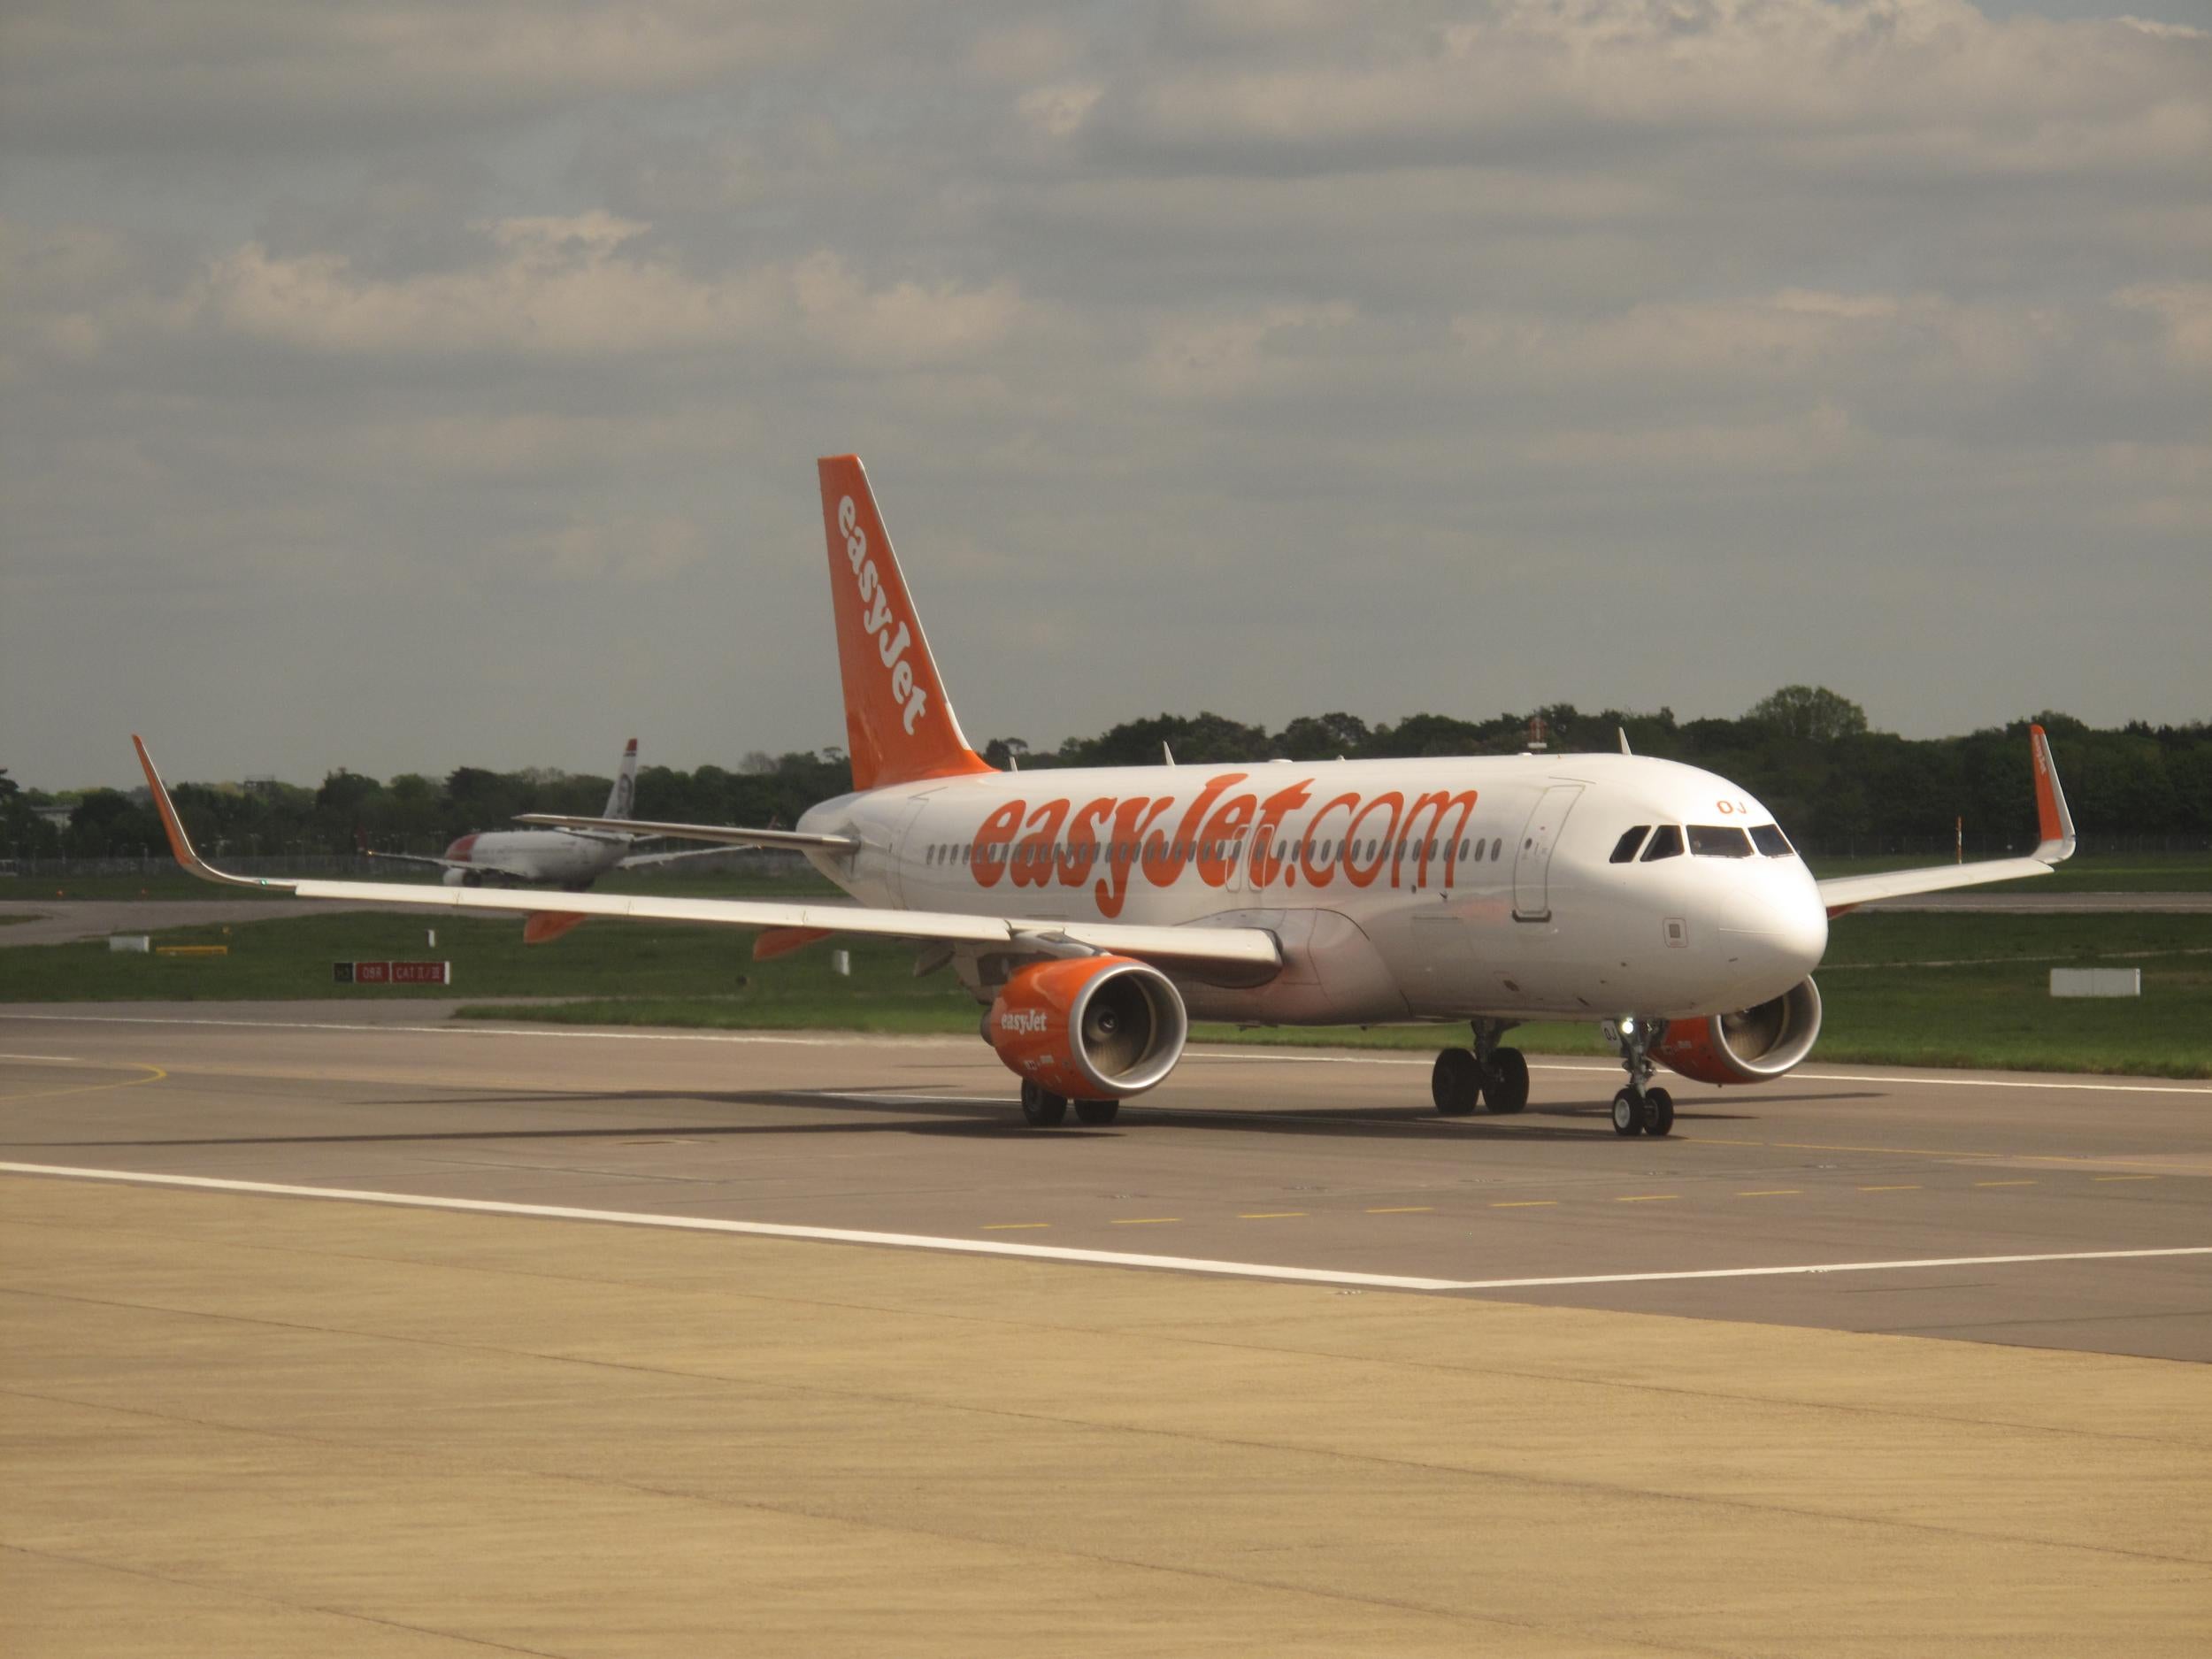 Time watch: easyJet Airbus A320 taxiing at the airline's main base, Gatwick